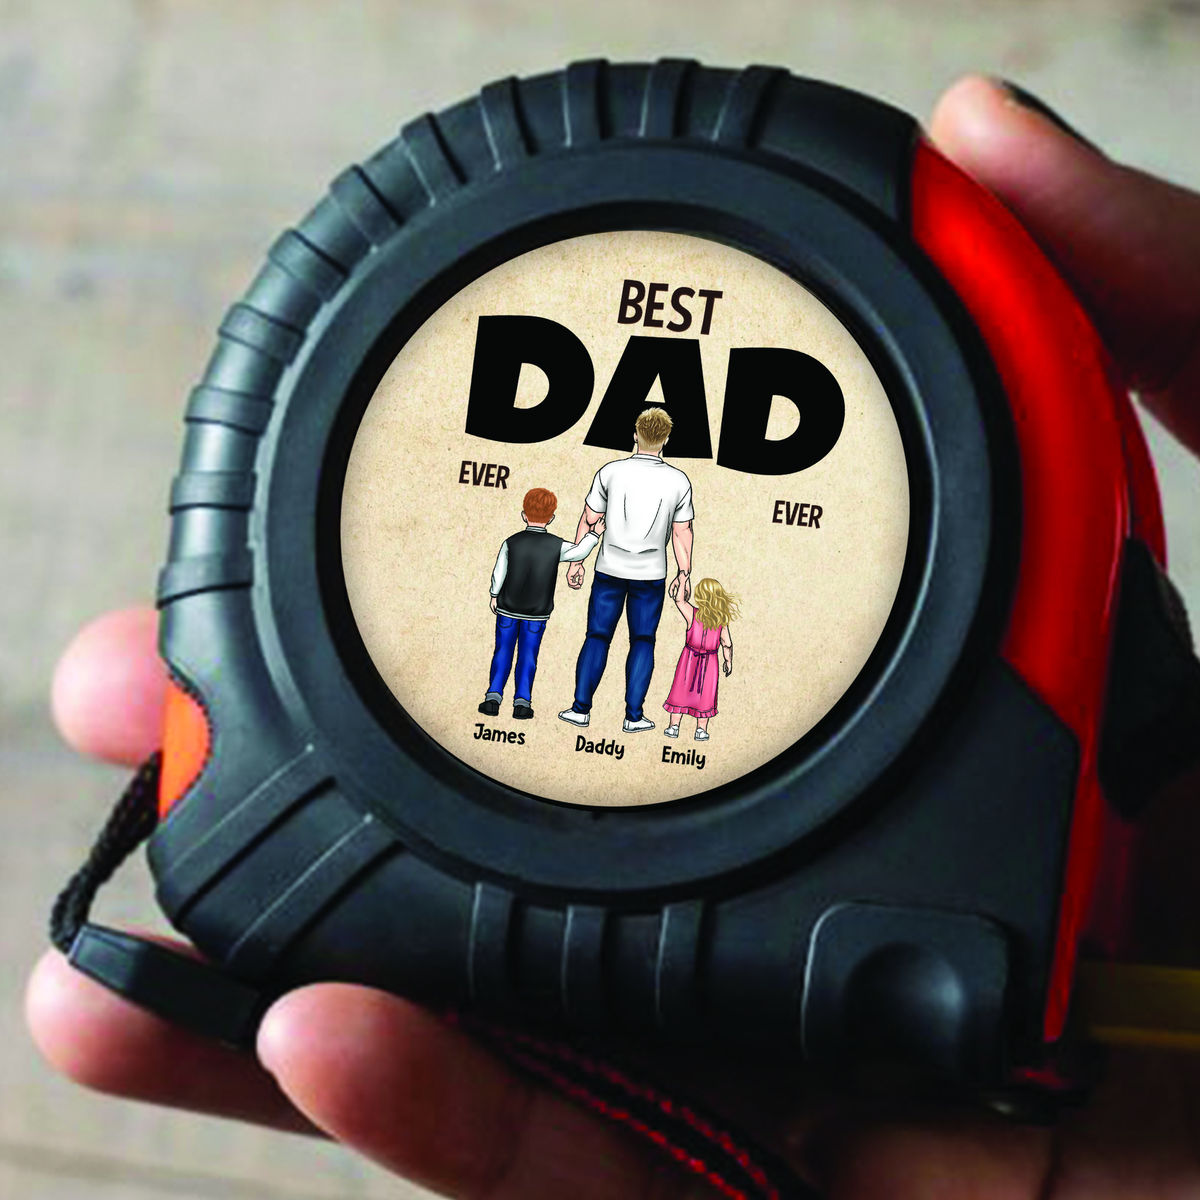 Personalized Tape Measure - Best DAD Ever Ever (29248)